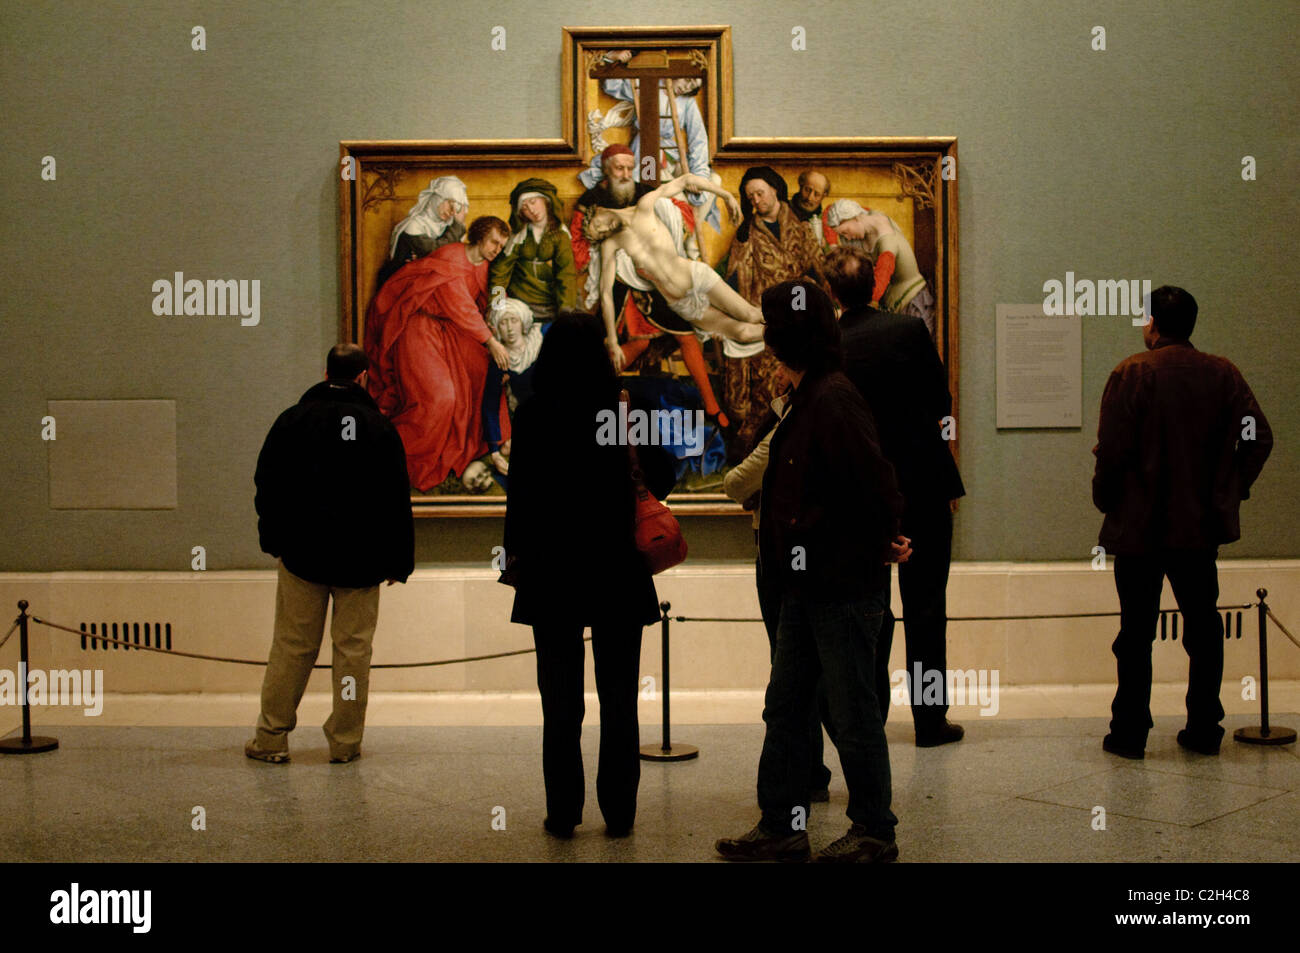 The Museo del Prado is a museum and art gallery located in Madrid, the capital of Spain. Stock Photo